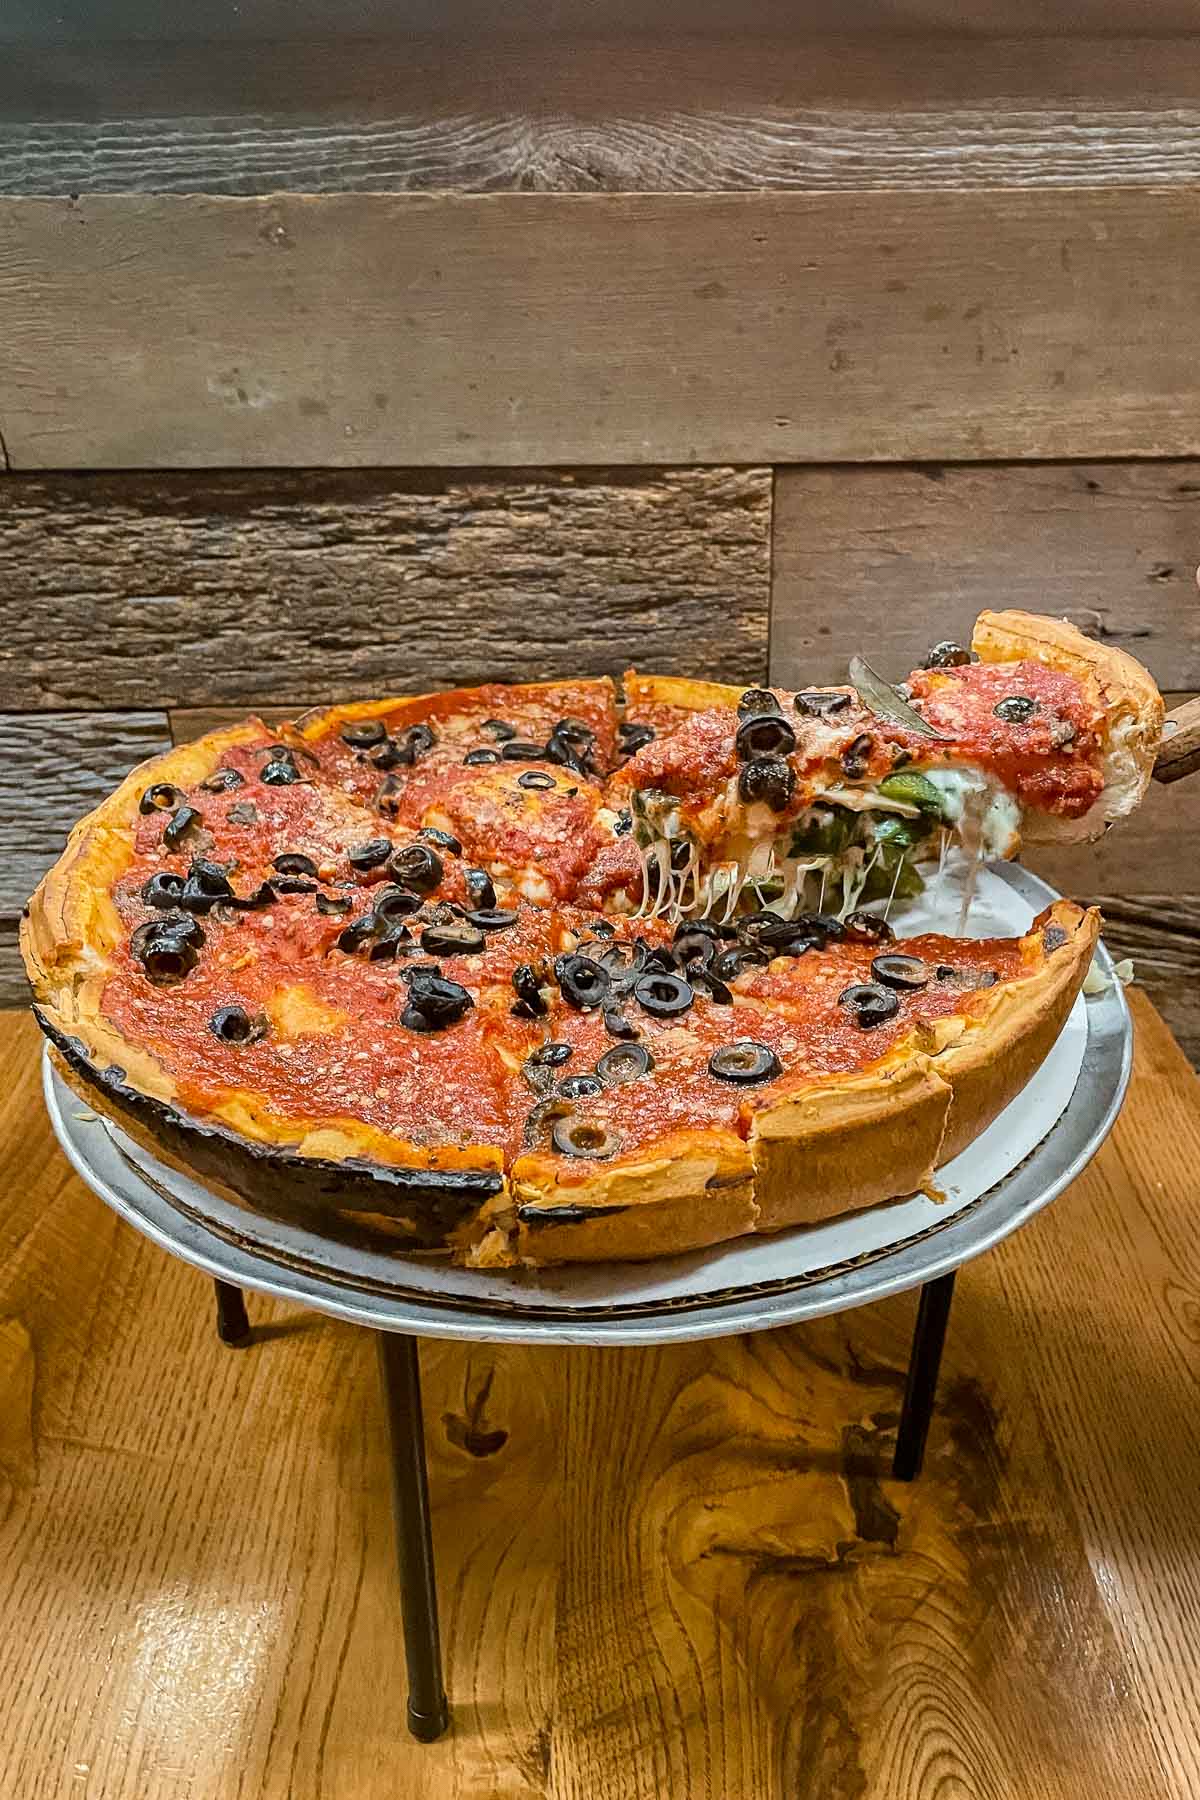 Deep dish pizza at Giordano's in Chicago